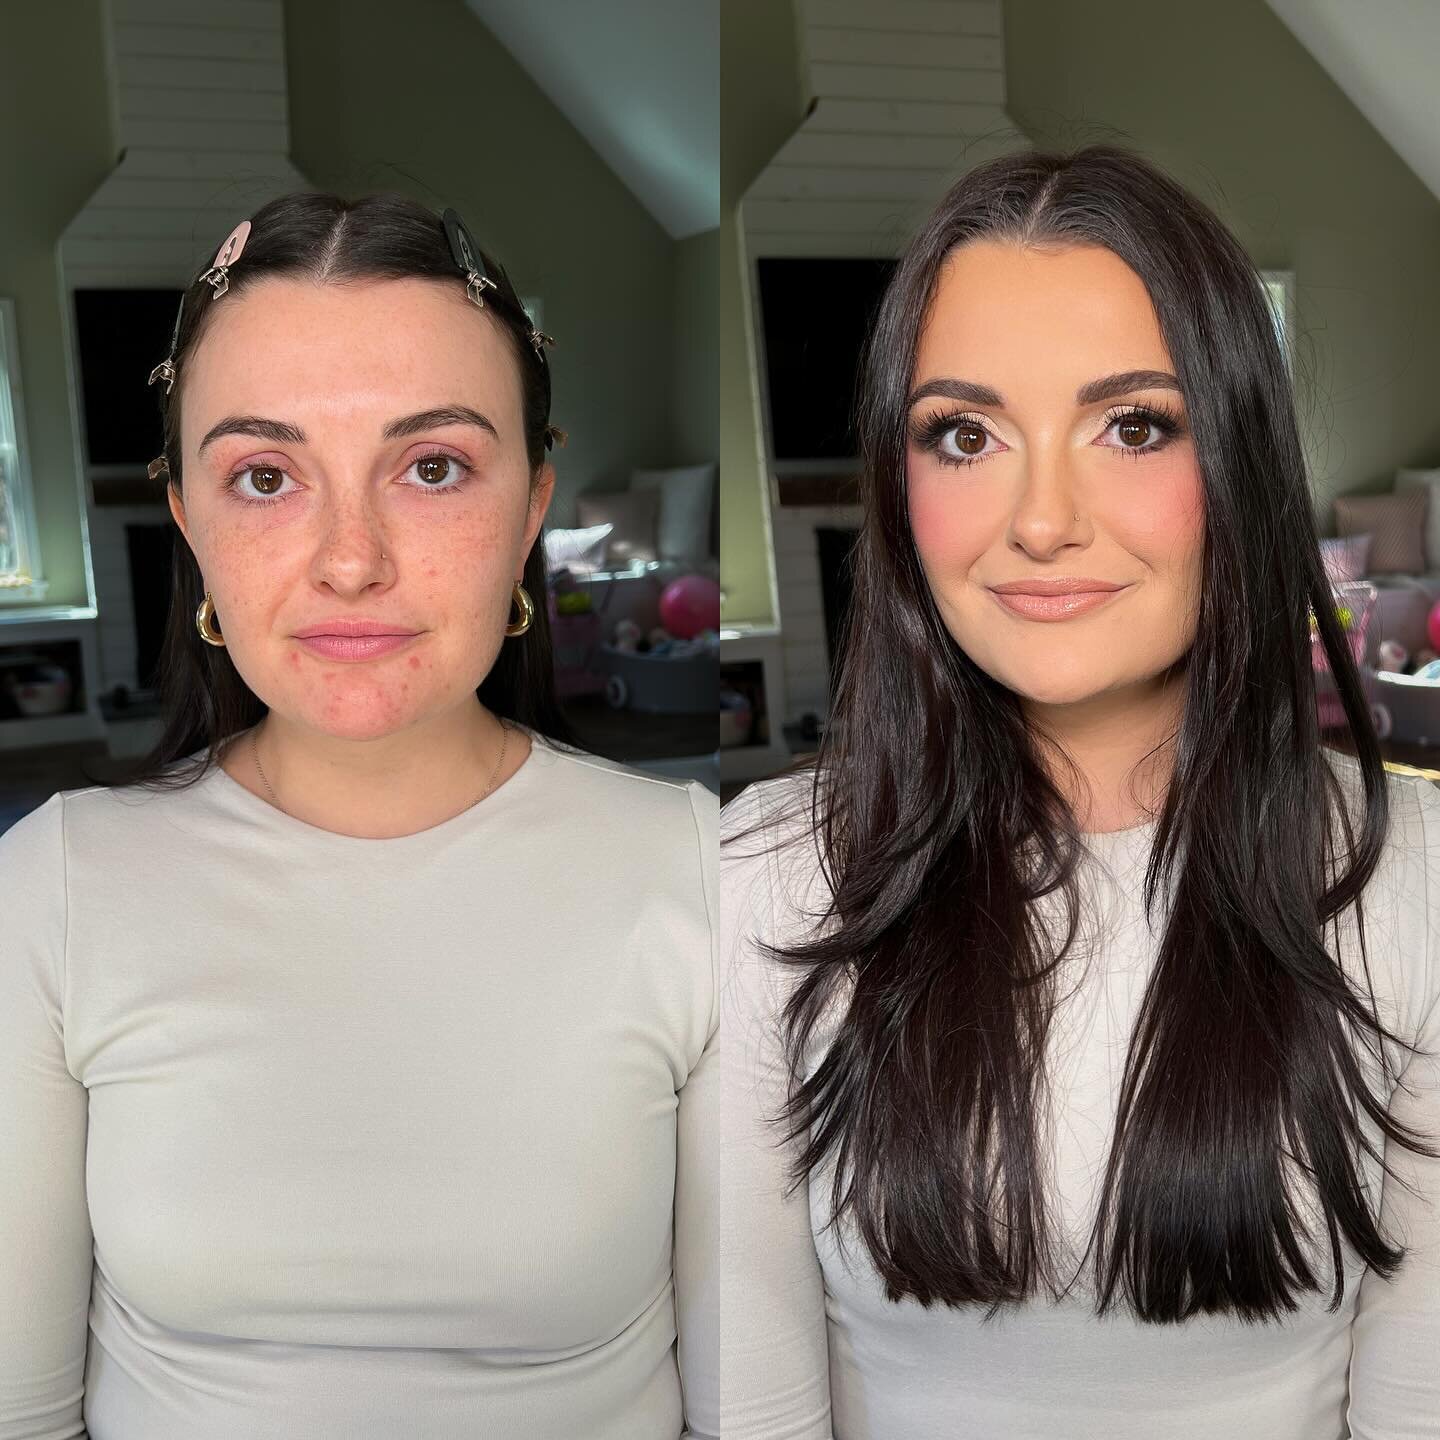 Makeup look from my first 1:1 demo! 🤍

What we went over &mdash; 
- Most requested makeup look
- Step by Step tutorial 
- Product placement 
- Holy grail products 

Who else wants to book a 1:1 lesson!!? 
&mdash; This made my heart so happy! 💕
.
.
